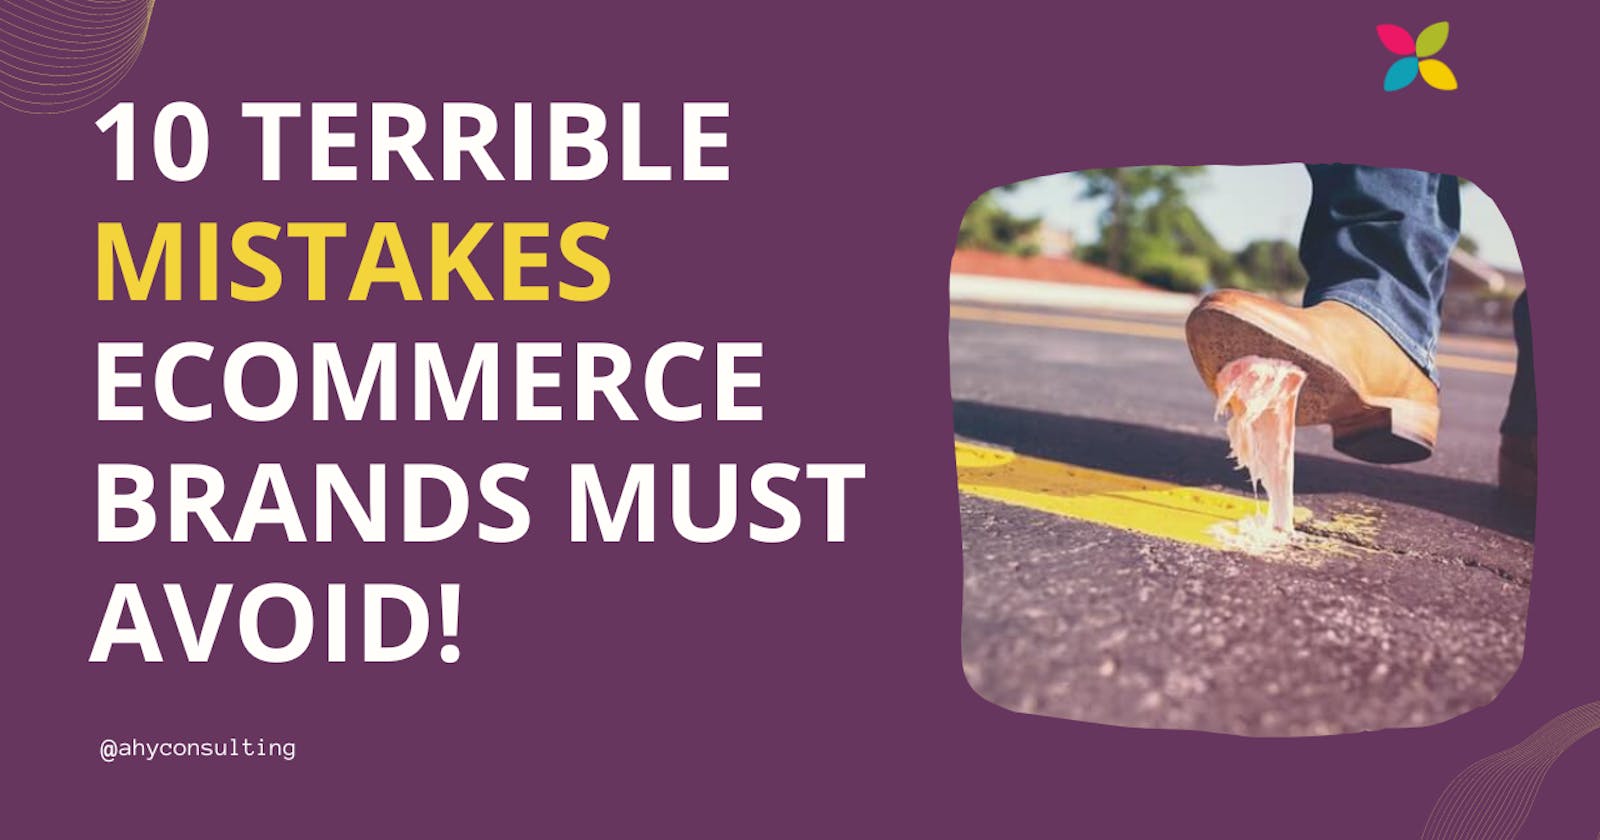 10 Terrible mistakes eCommerce brands must avoid